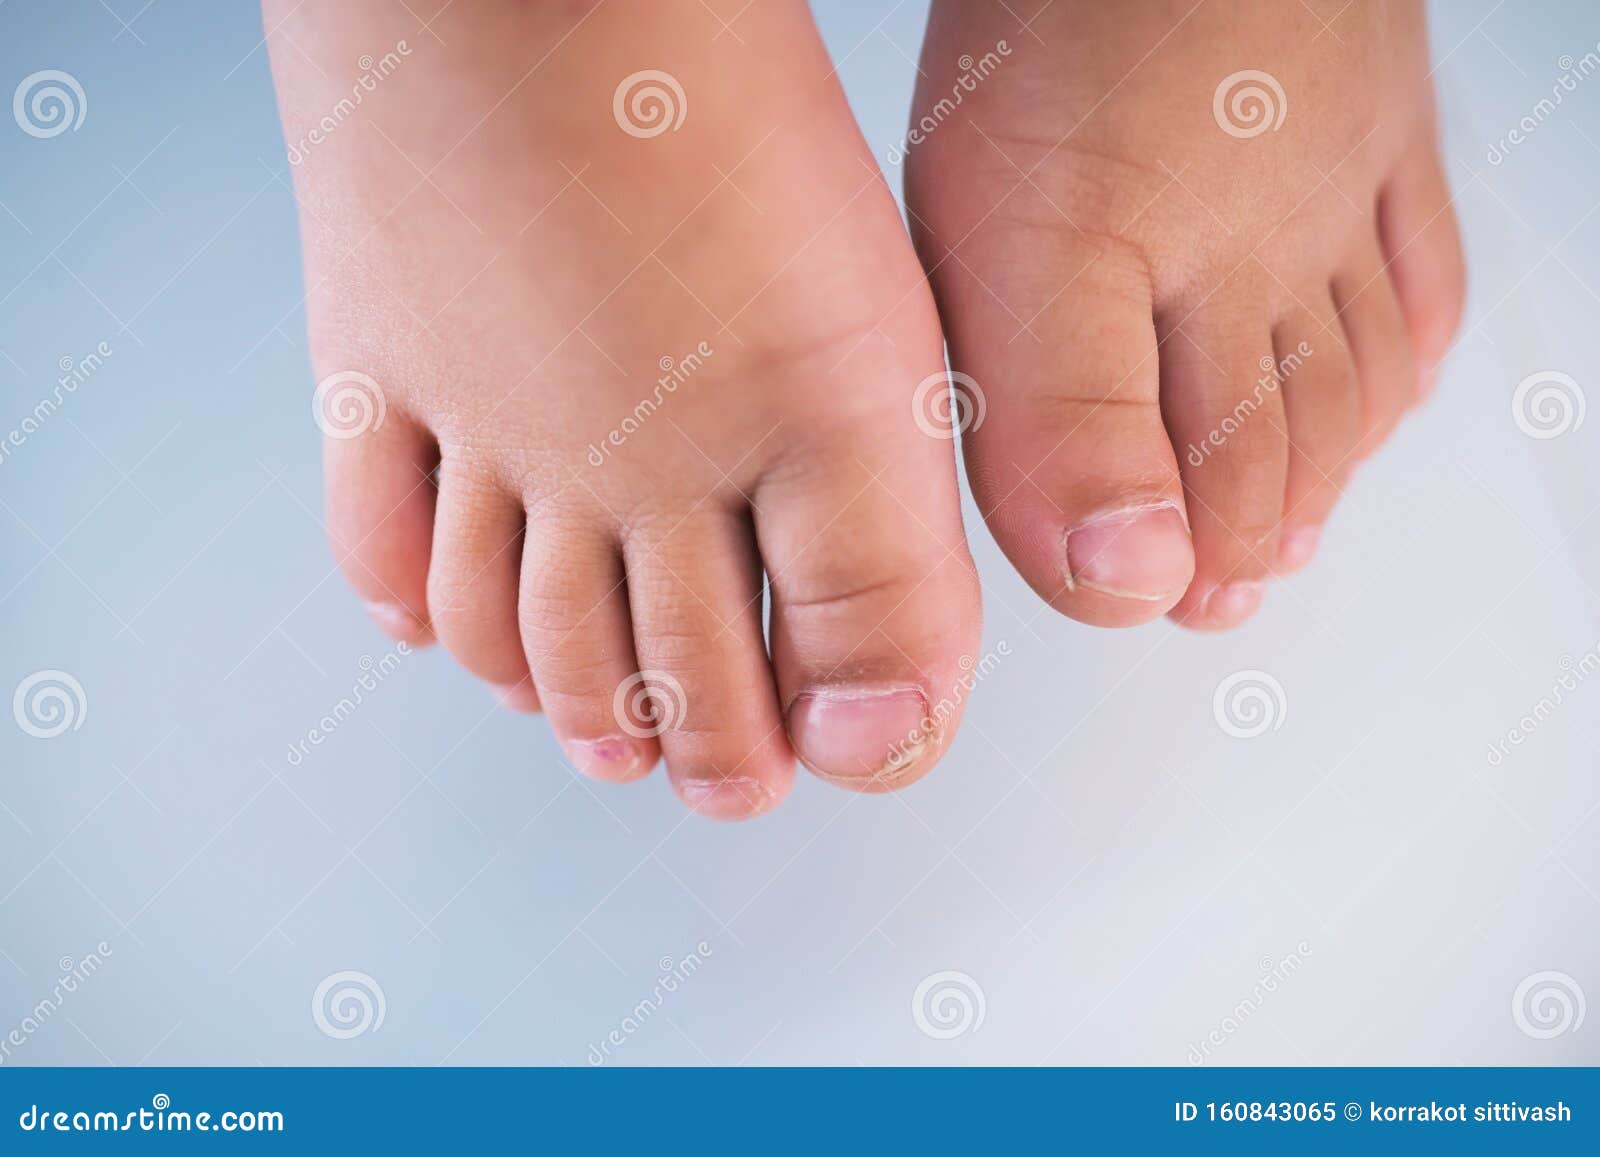 Children Foot with a Cracked and Peeling Toe Nail on the Largest Toe.  Toenail Fungus Stock Image - Image of blue, disease: 160843065